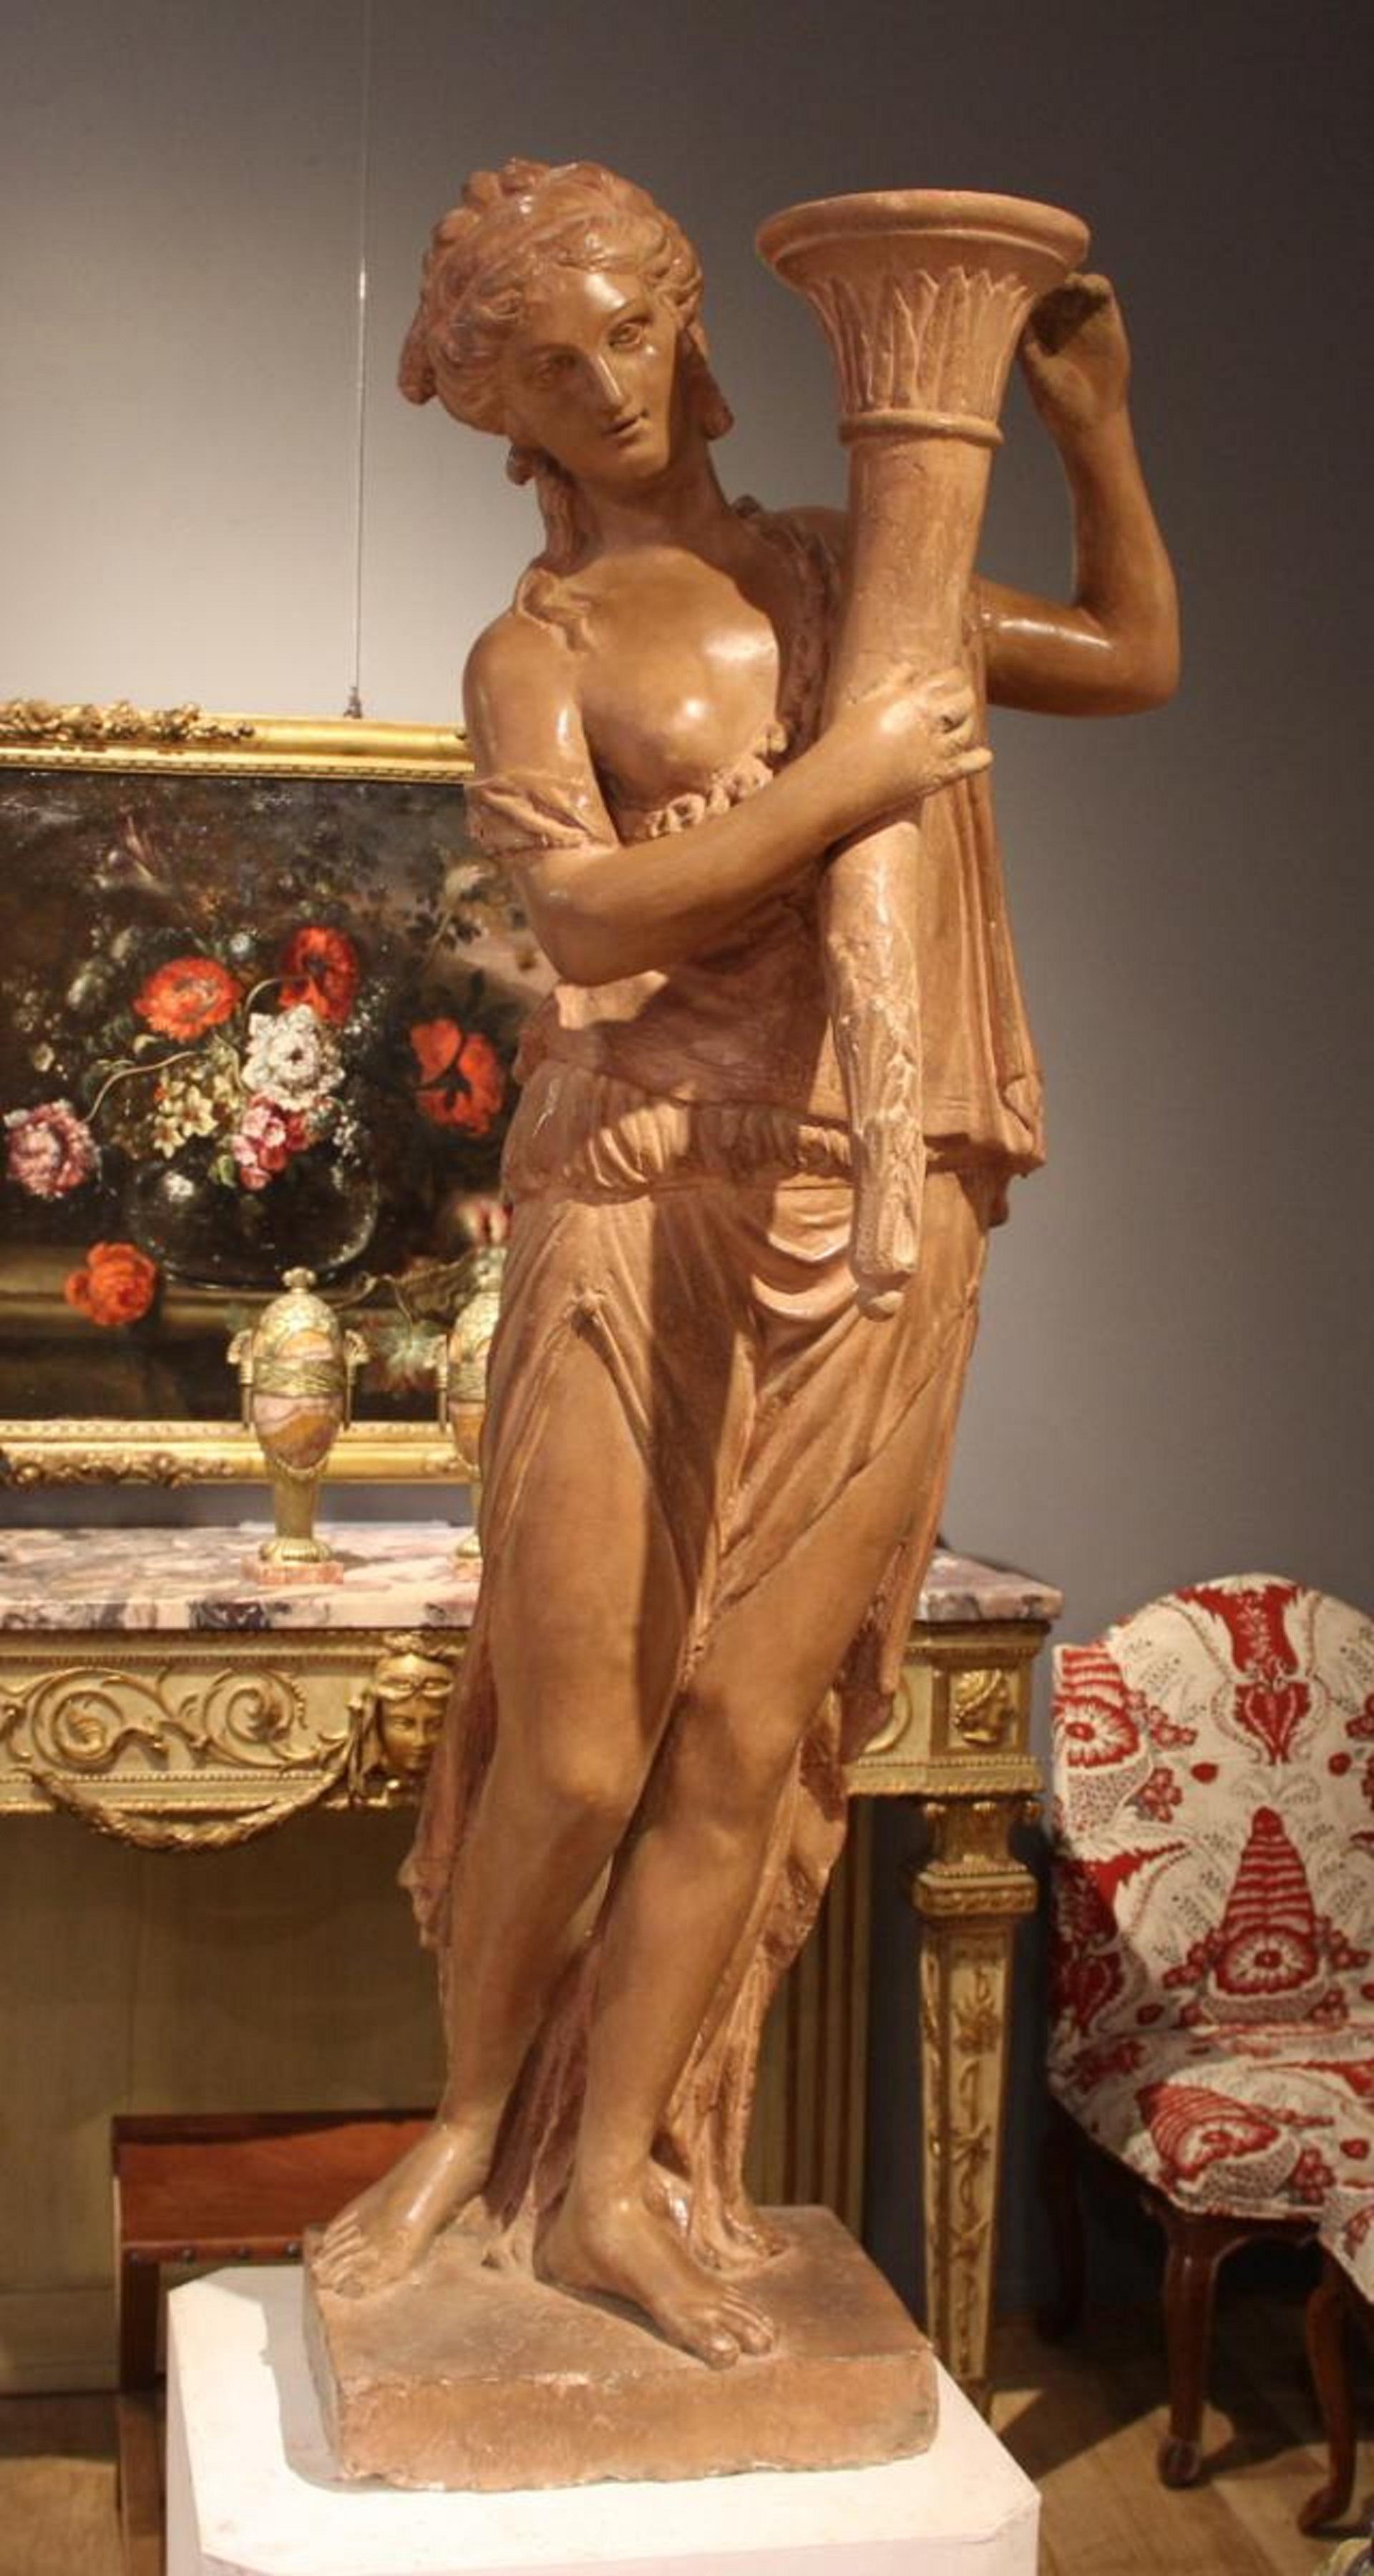 Pair of statues representing women dressed in the antique style holding torches.
Patinated terracotta stucco.
Louis XVI period
XVIIIth century.